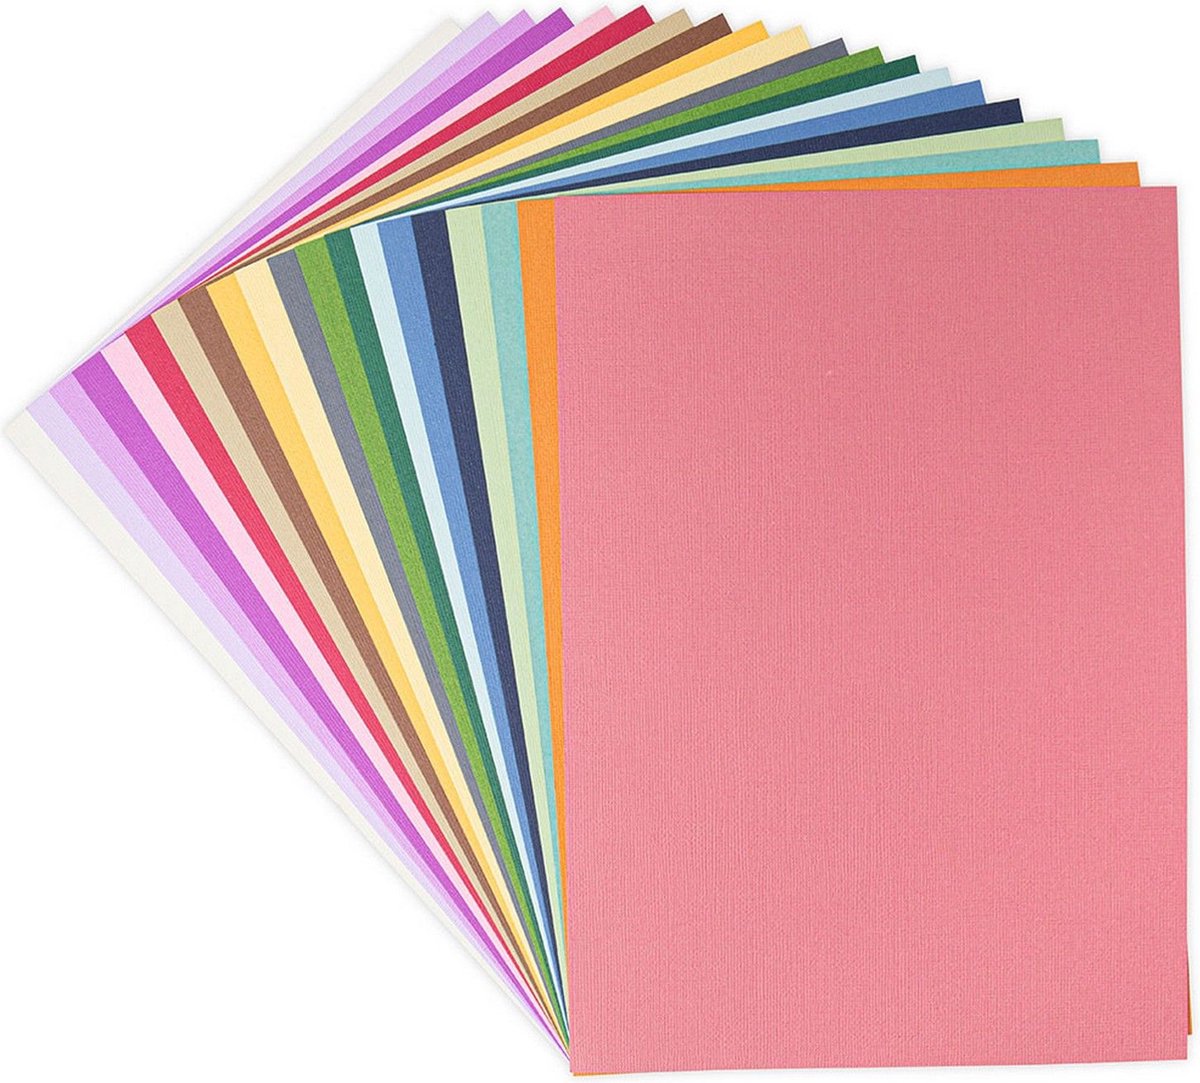 Sizzix Surfacez Cardstock 8 - A4 - Muted Colors - 80stuks